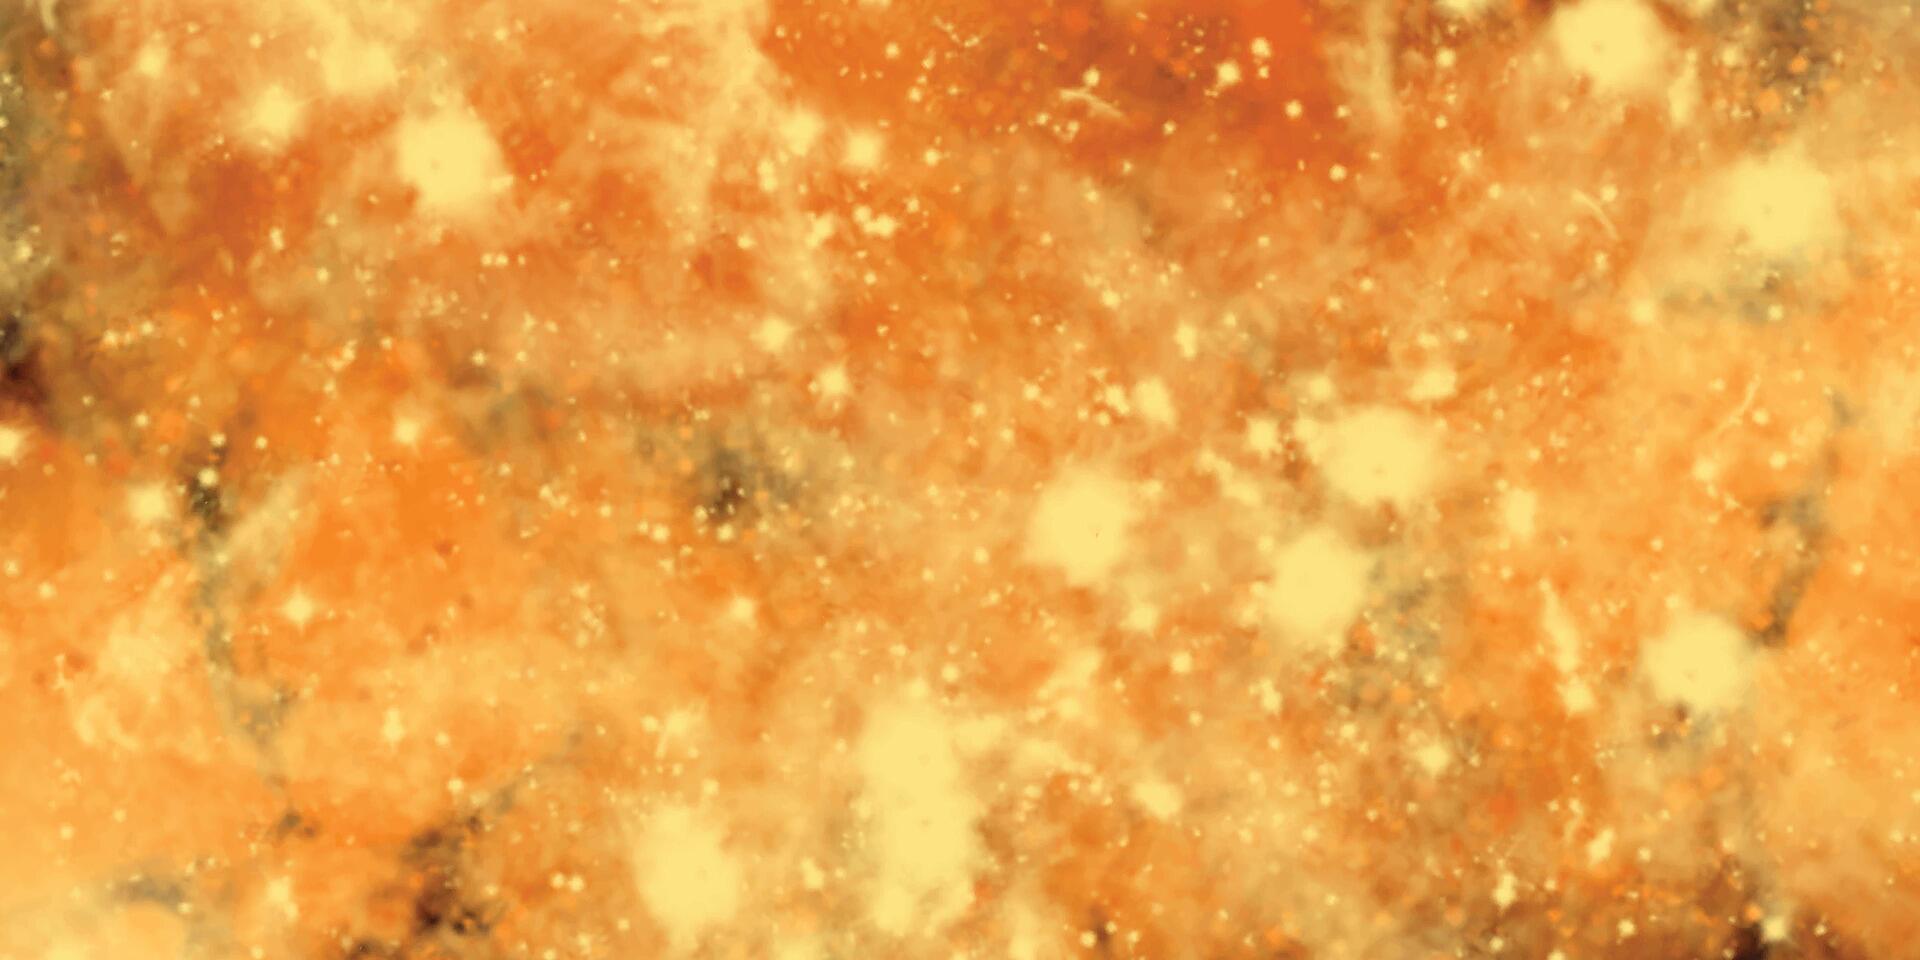 Colorful watercolor background. Orange watercolor background. Sunset background with dots. Abstract grunge texture vector